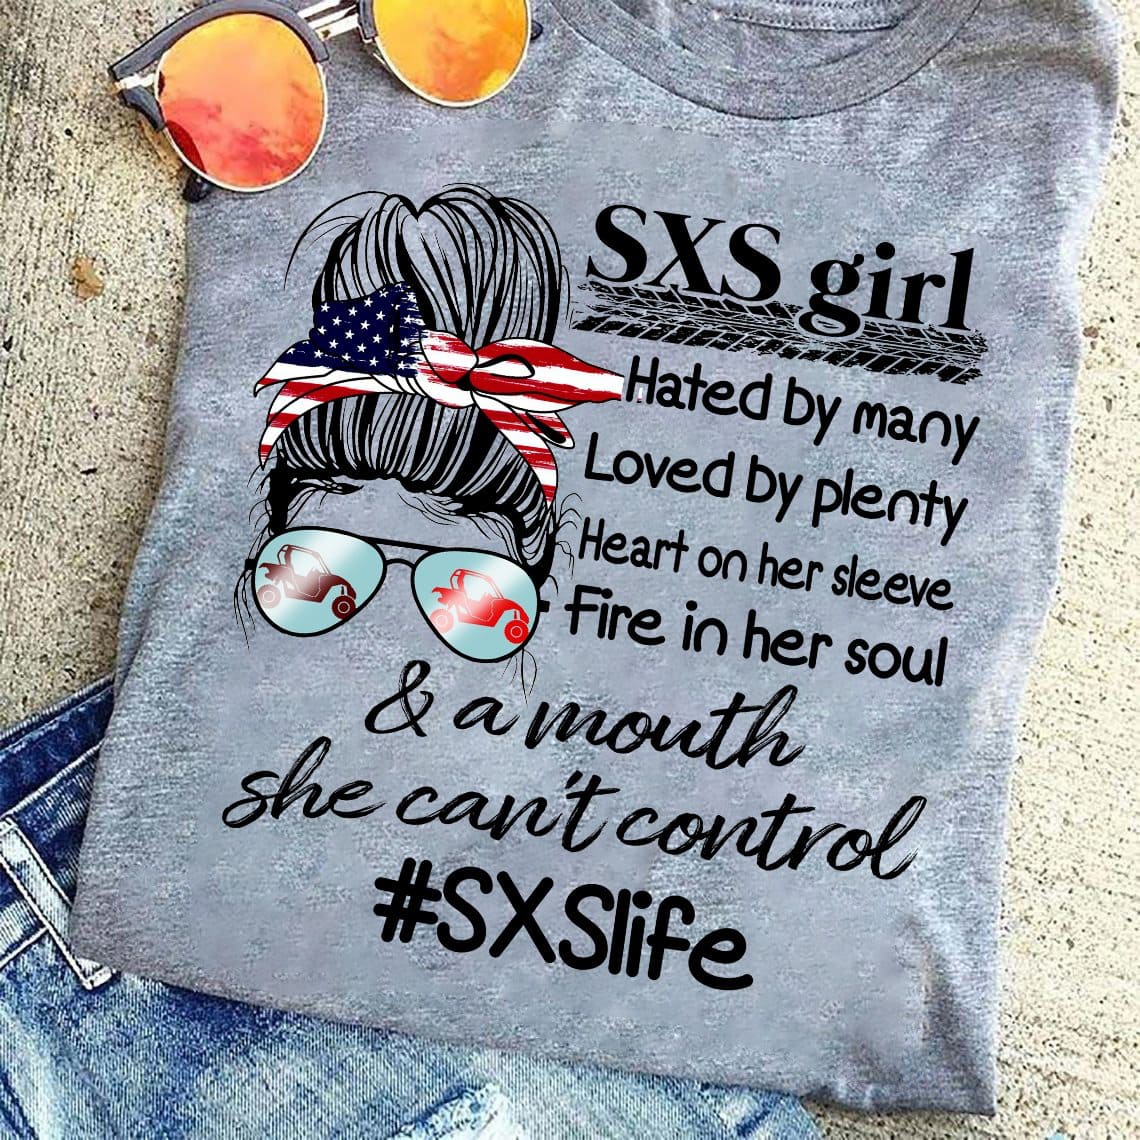 SXS girl - Hated by many, loved by plenty, heart on her sleeve, SXS life